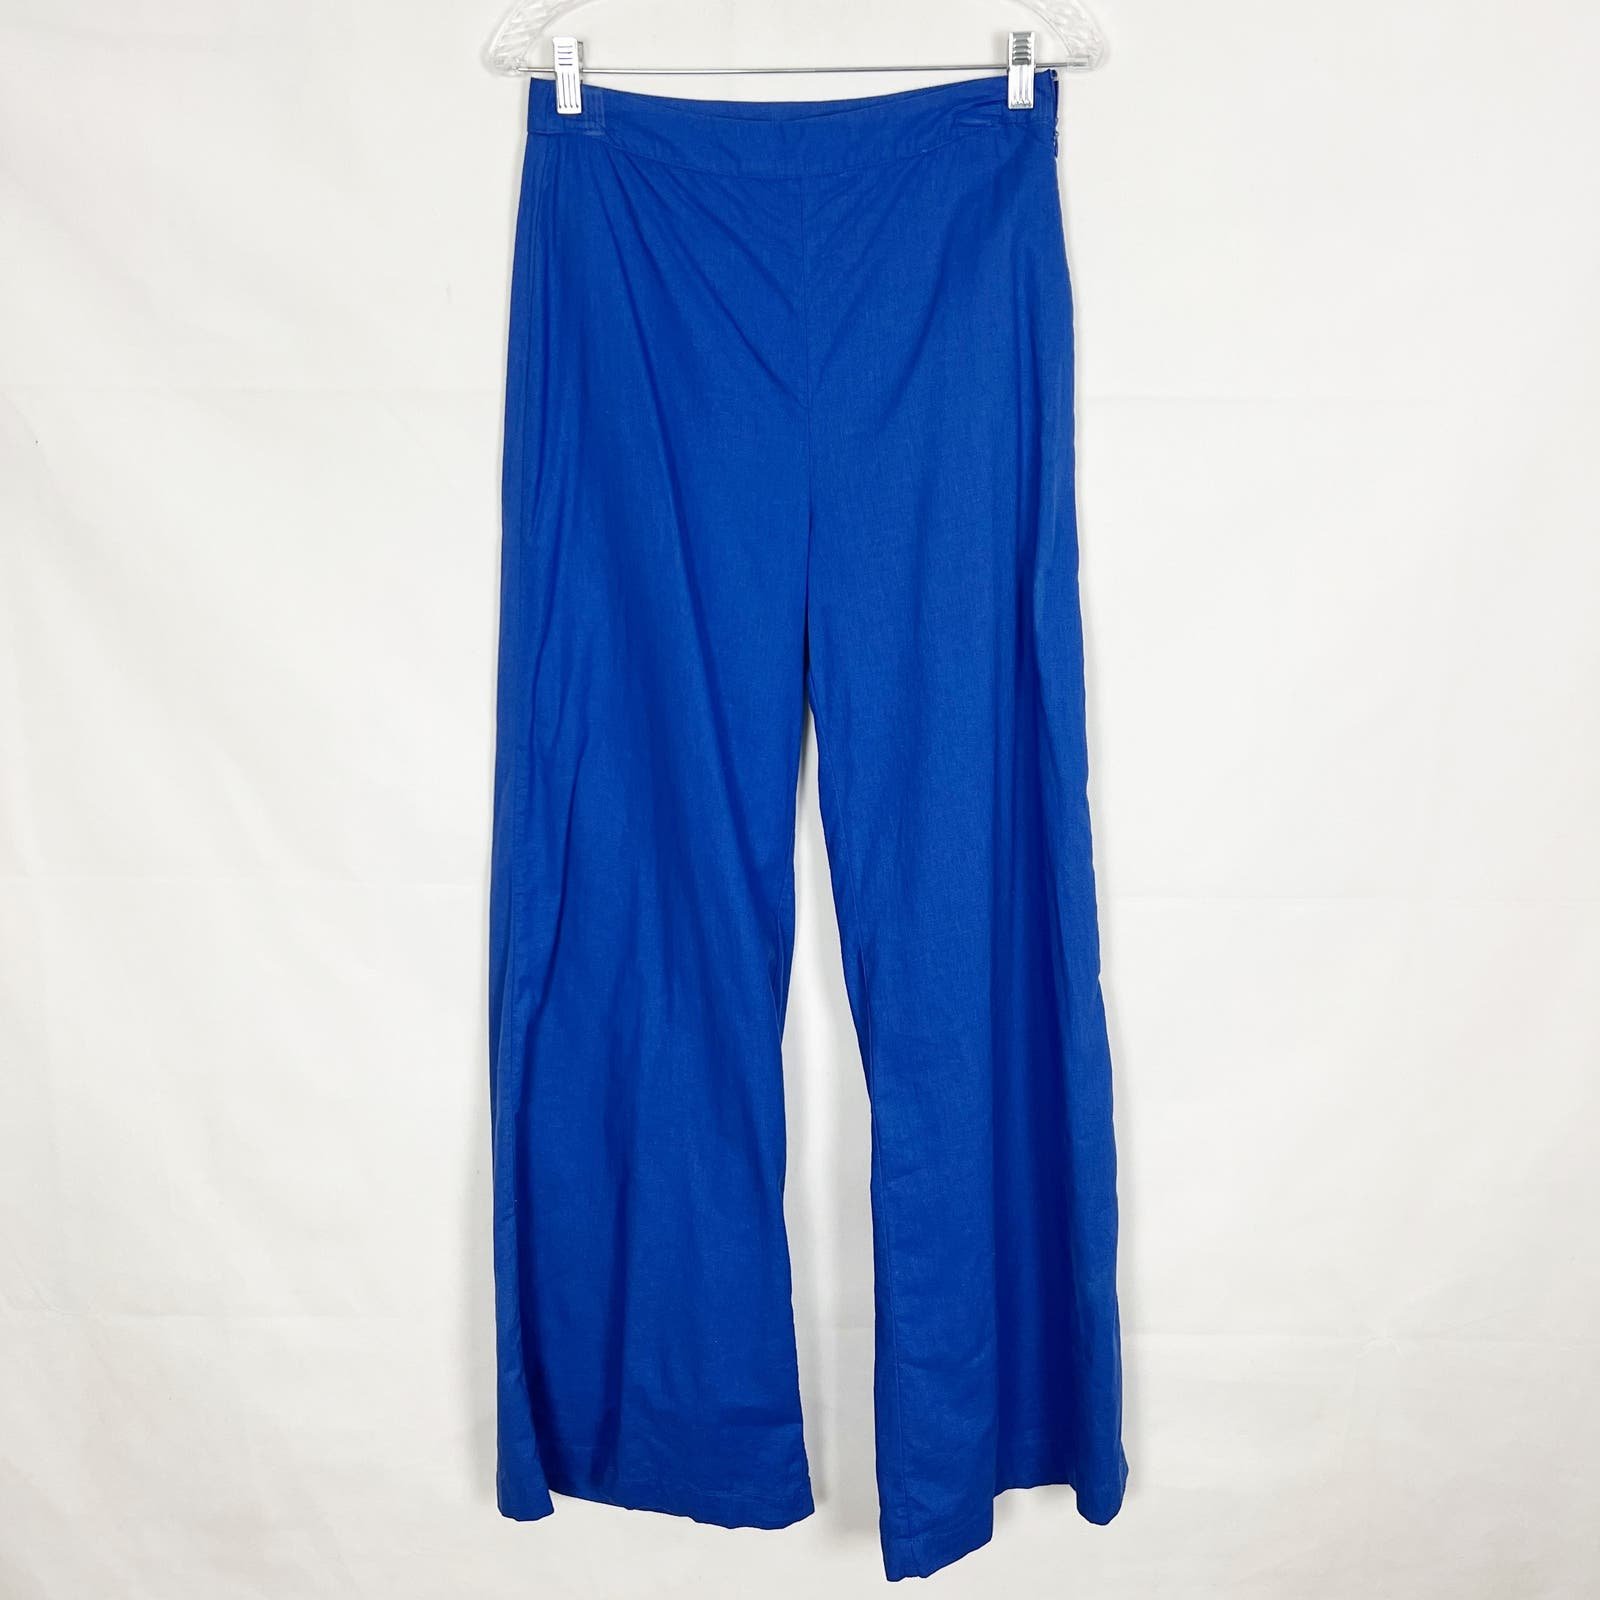 Personality Lulus Linen Blend High-Rise Royal Blue Bell